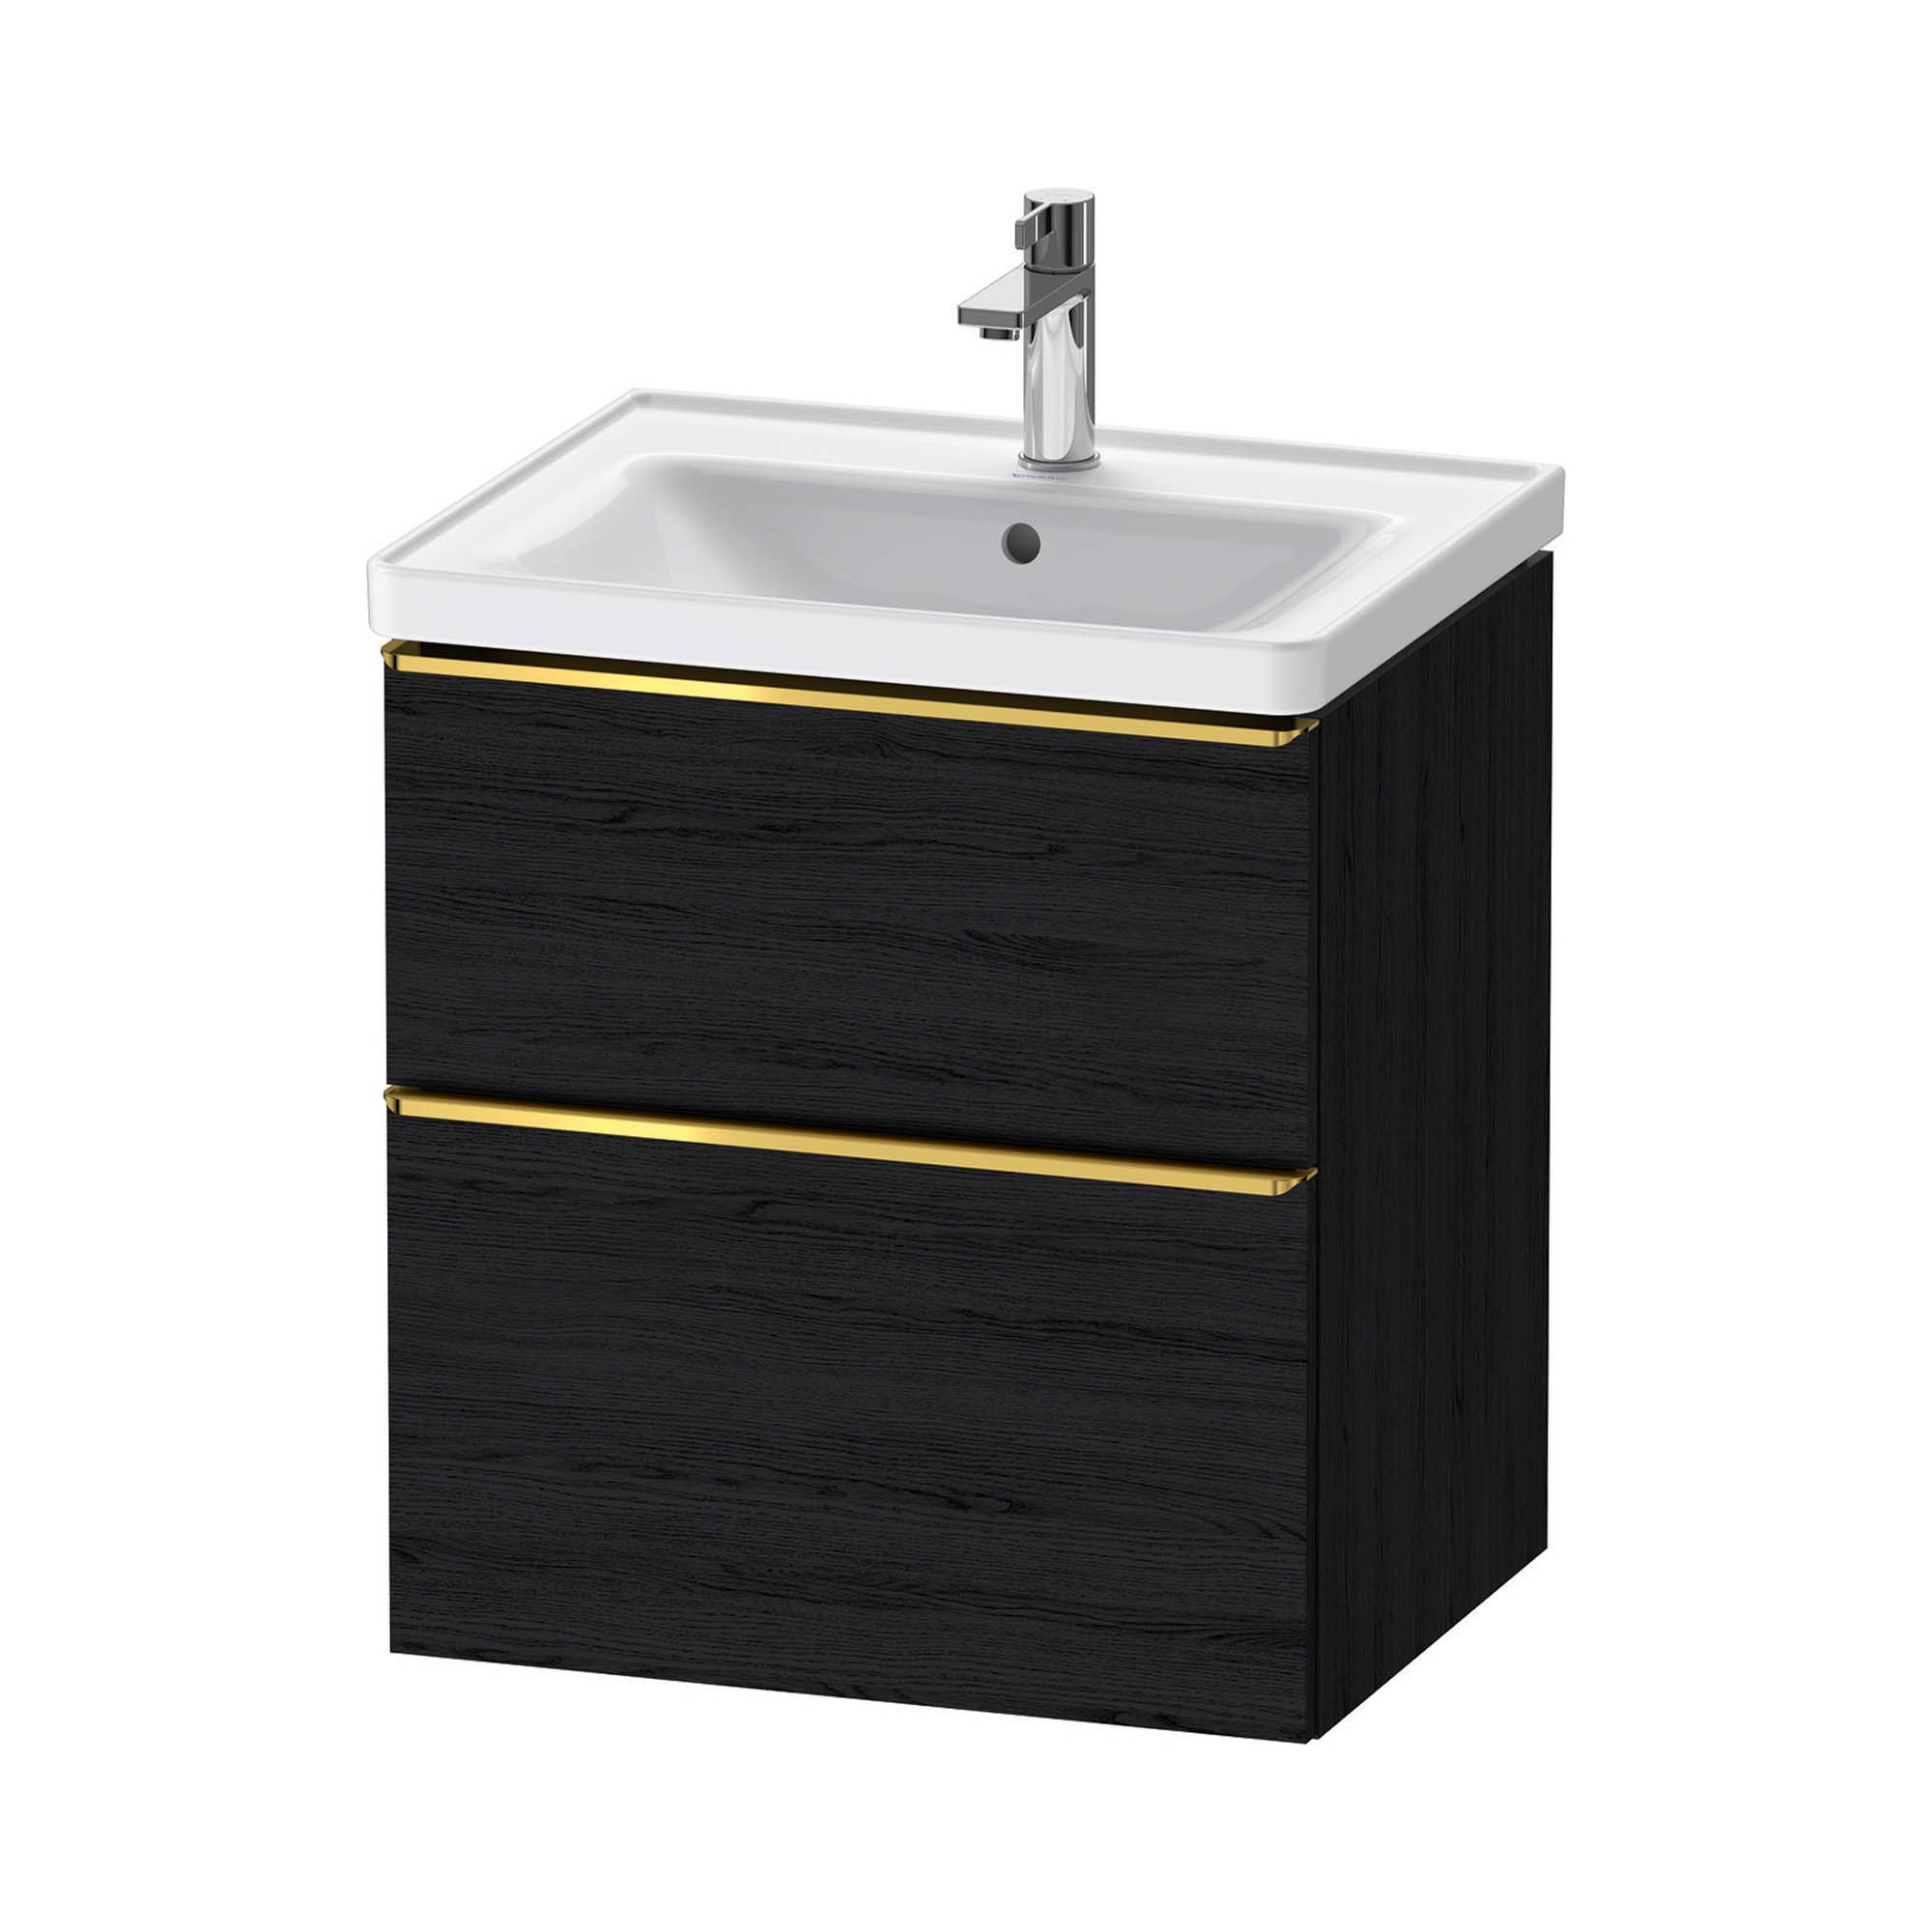 duravit d-neo 600 wall mounted vanity unit with d-neo basin black oak gold handles